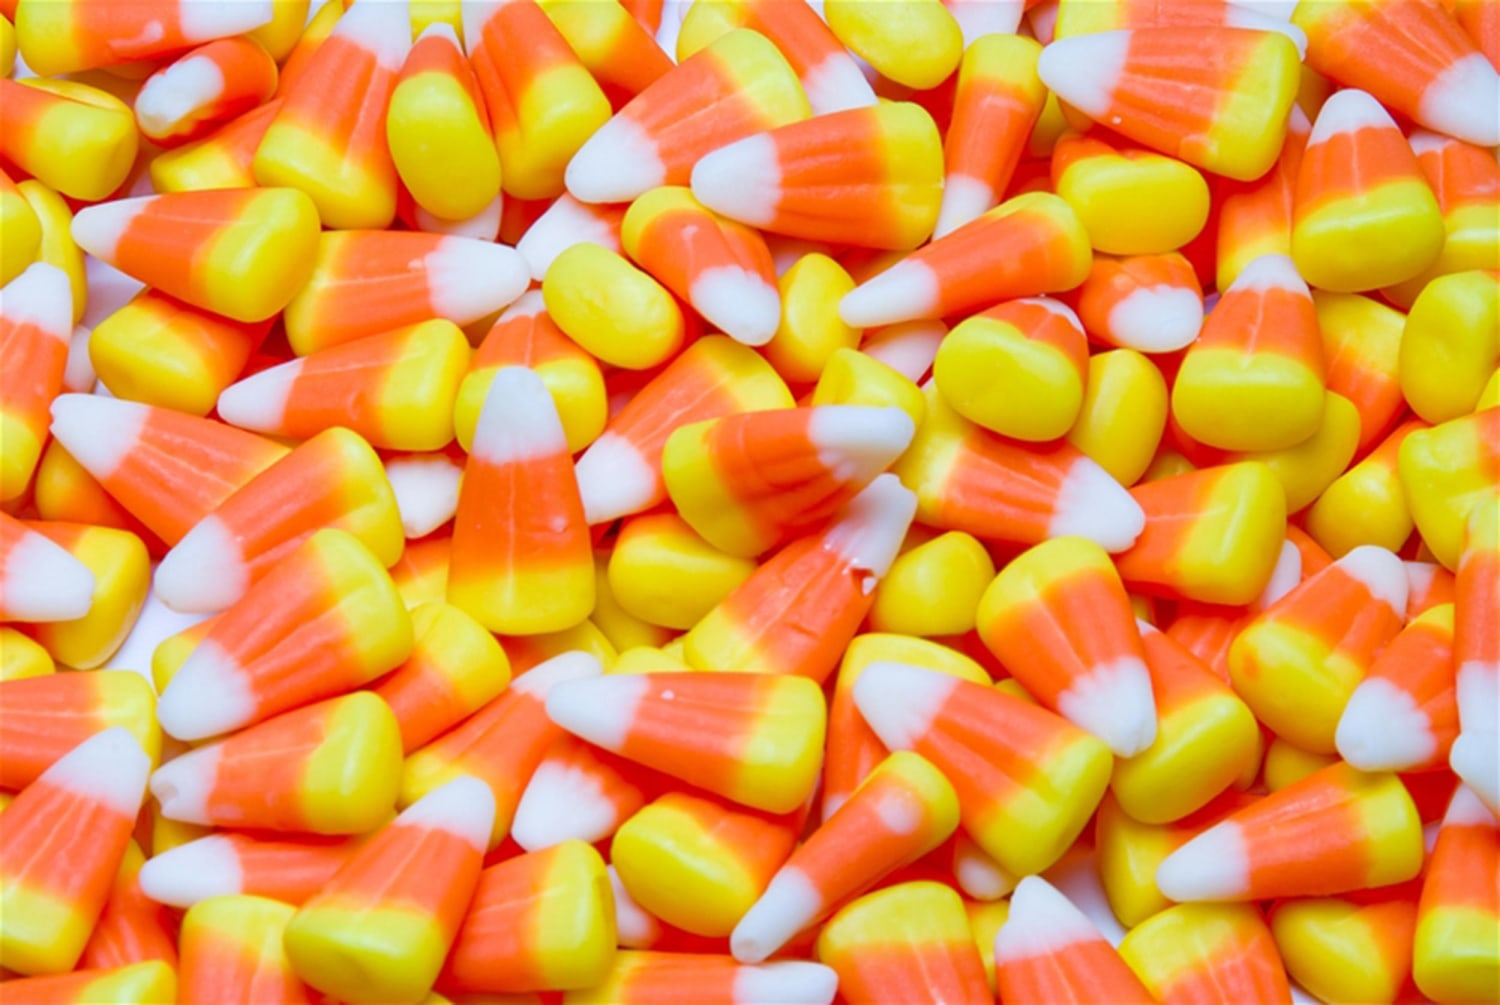 Healthier Candy Options for Halloween - Fed & Fit